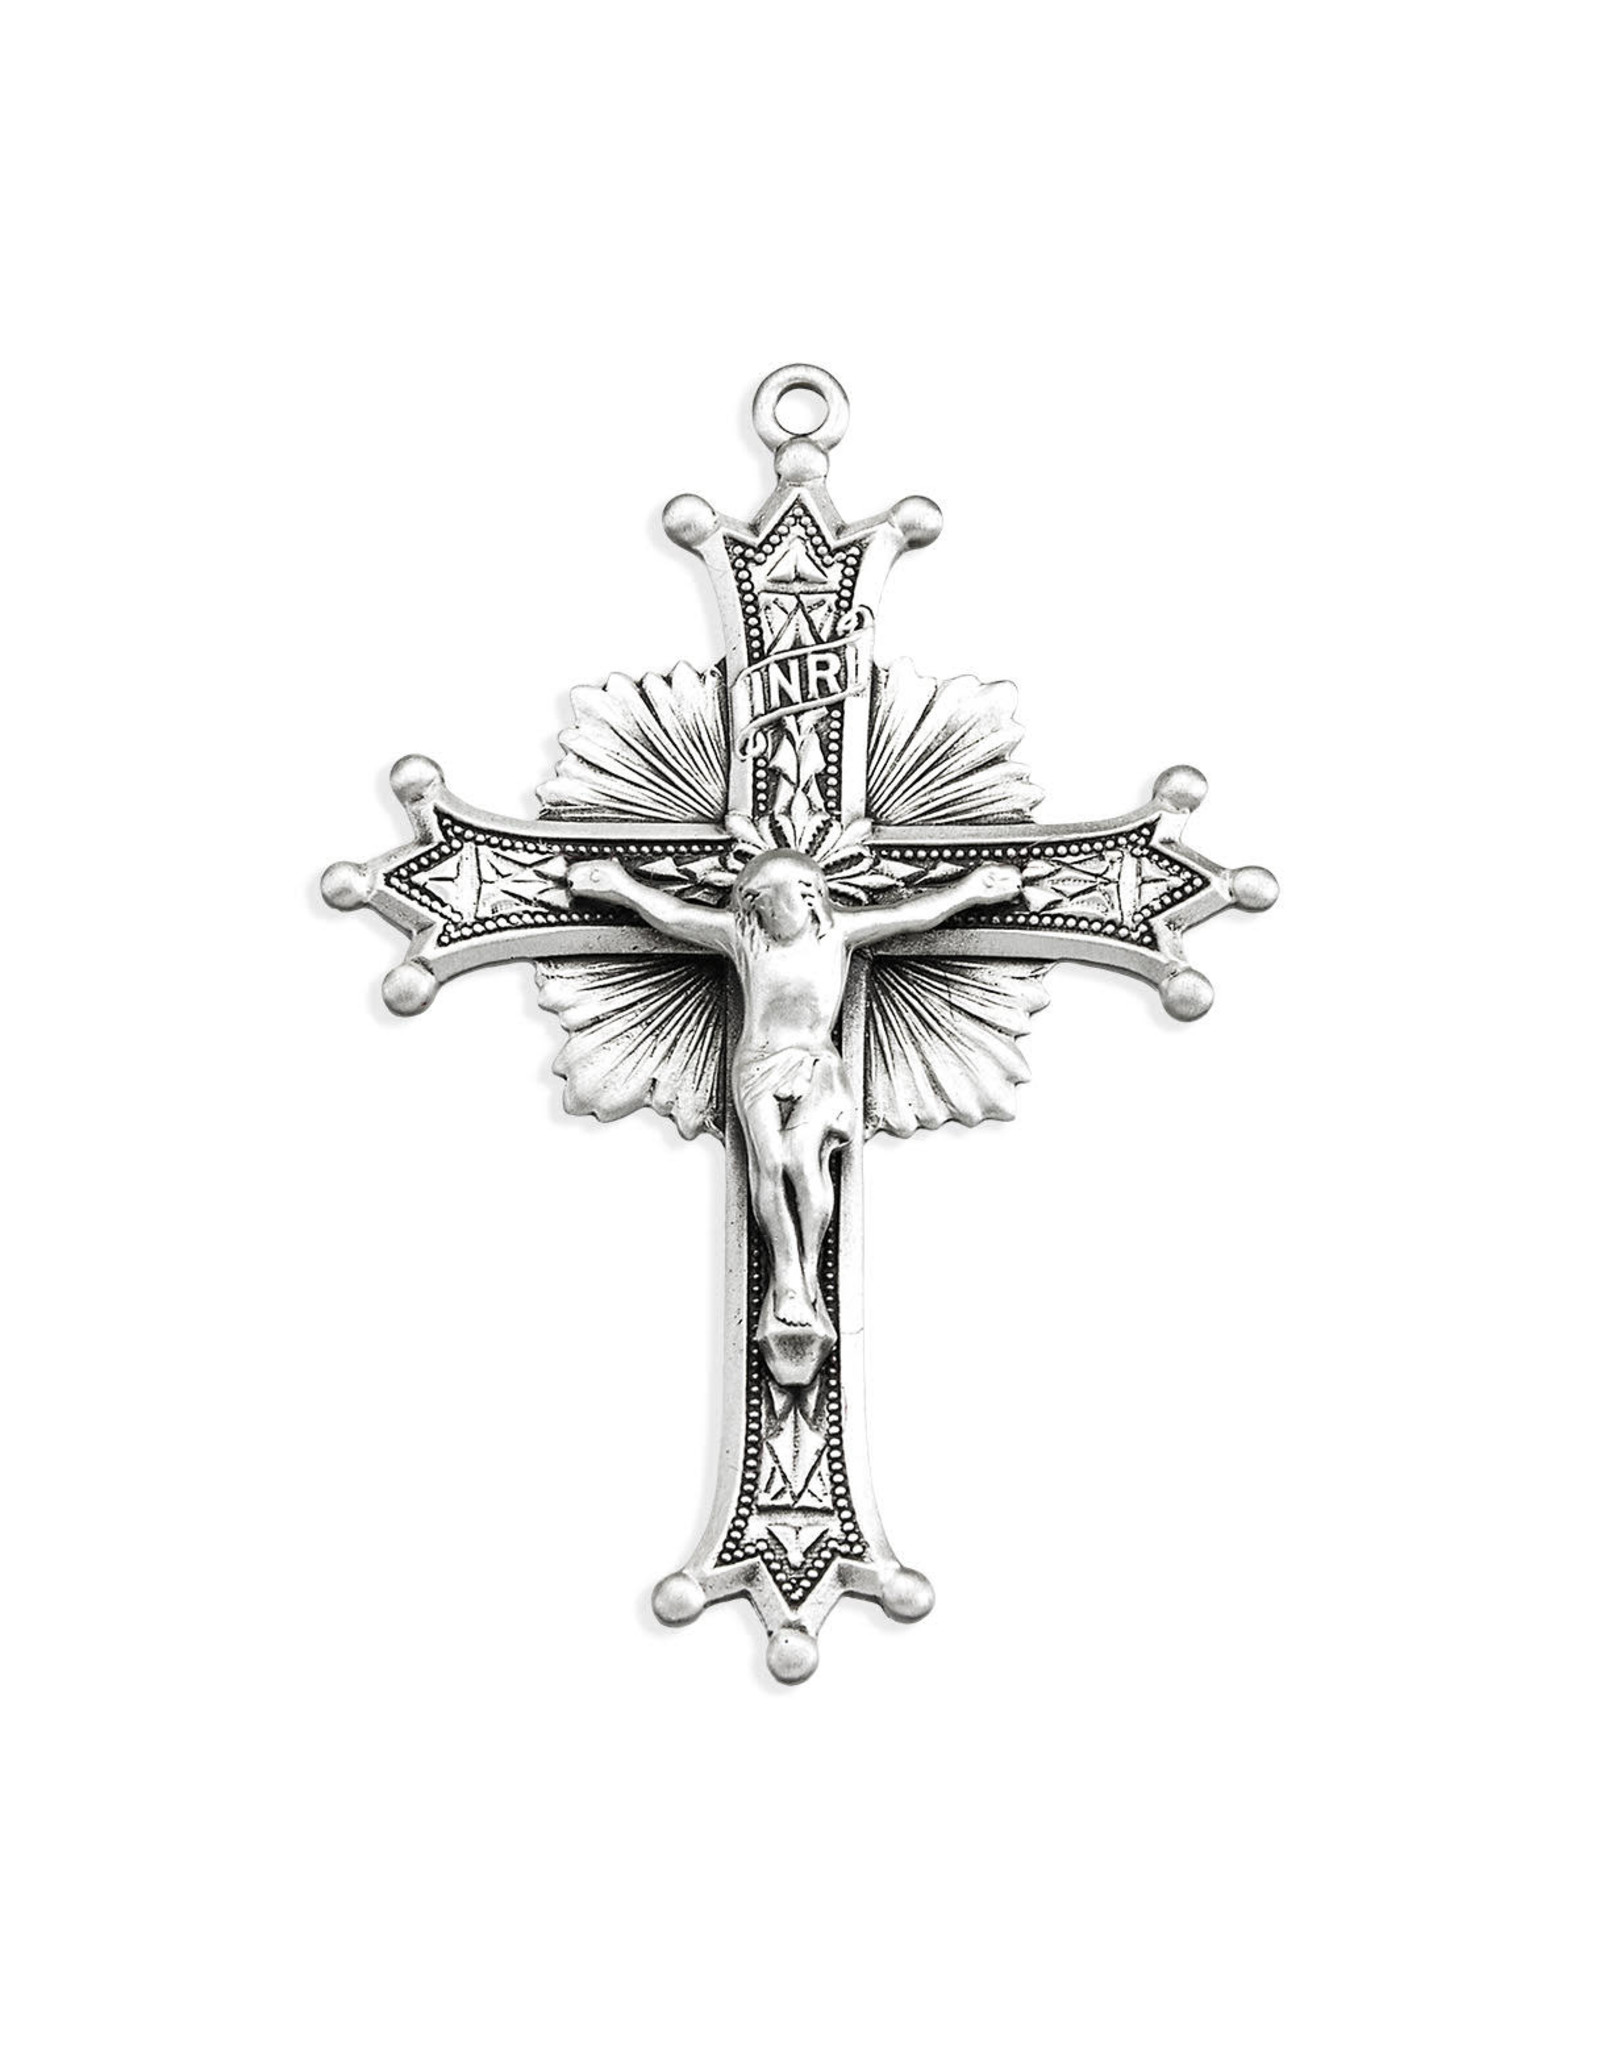 Starburst Crucifix with Engraved Detail (Sterling Silver) on 27" Chain